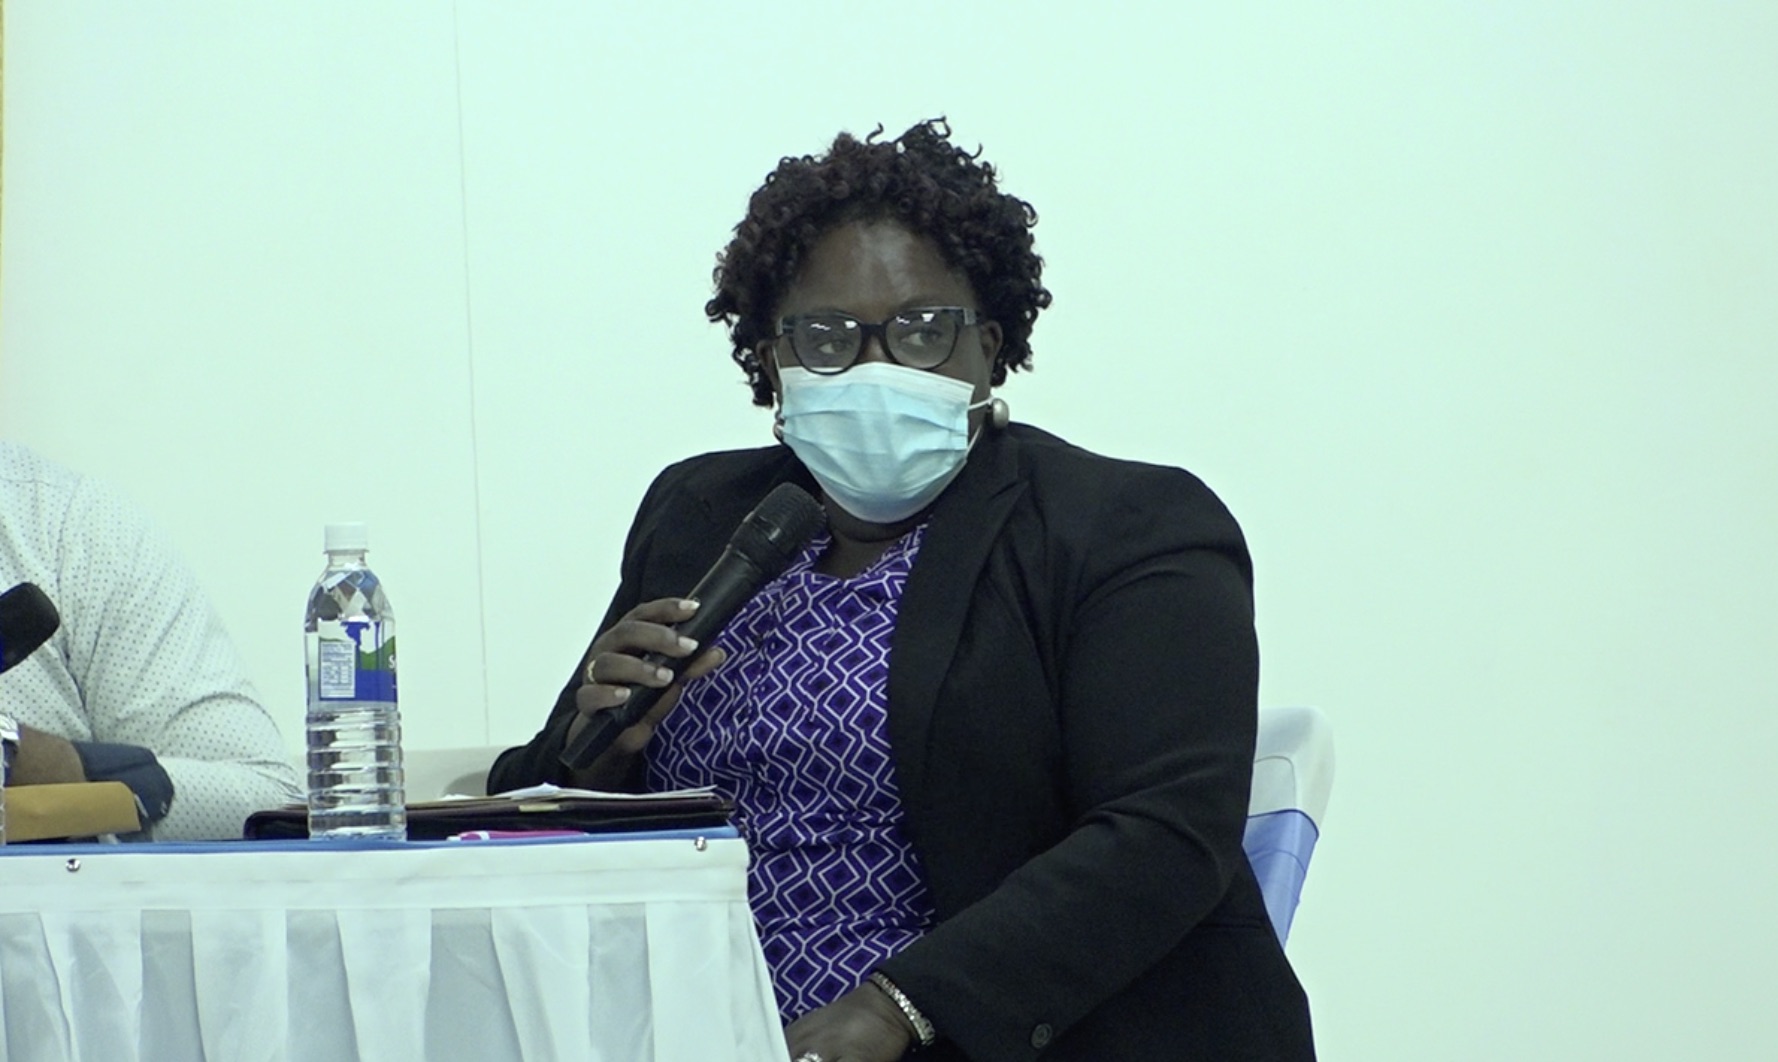 Hon. Hazel Brandy-Williams, Junior Minister of Health, at a town hall meeting hosted by the Nevis Island Administration on July 23, 2020, at the Cotton Ground Community Centre.